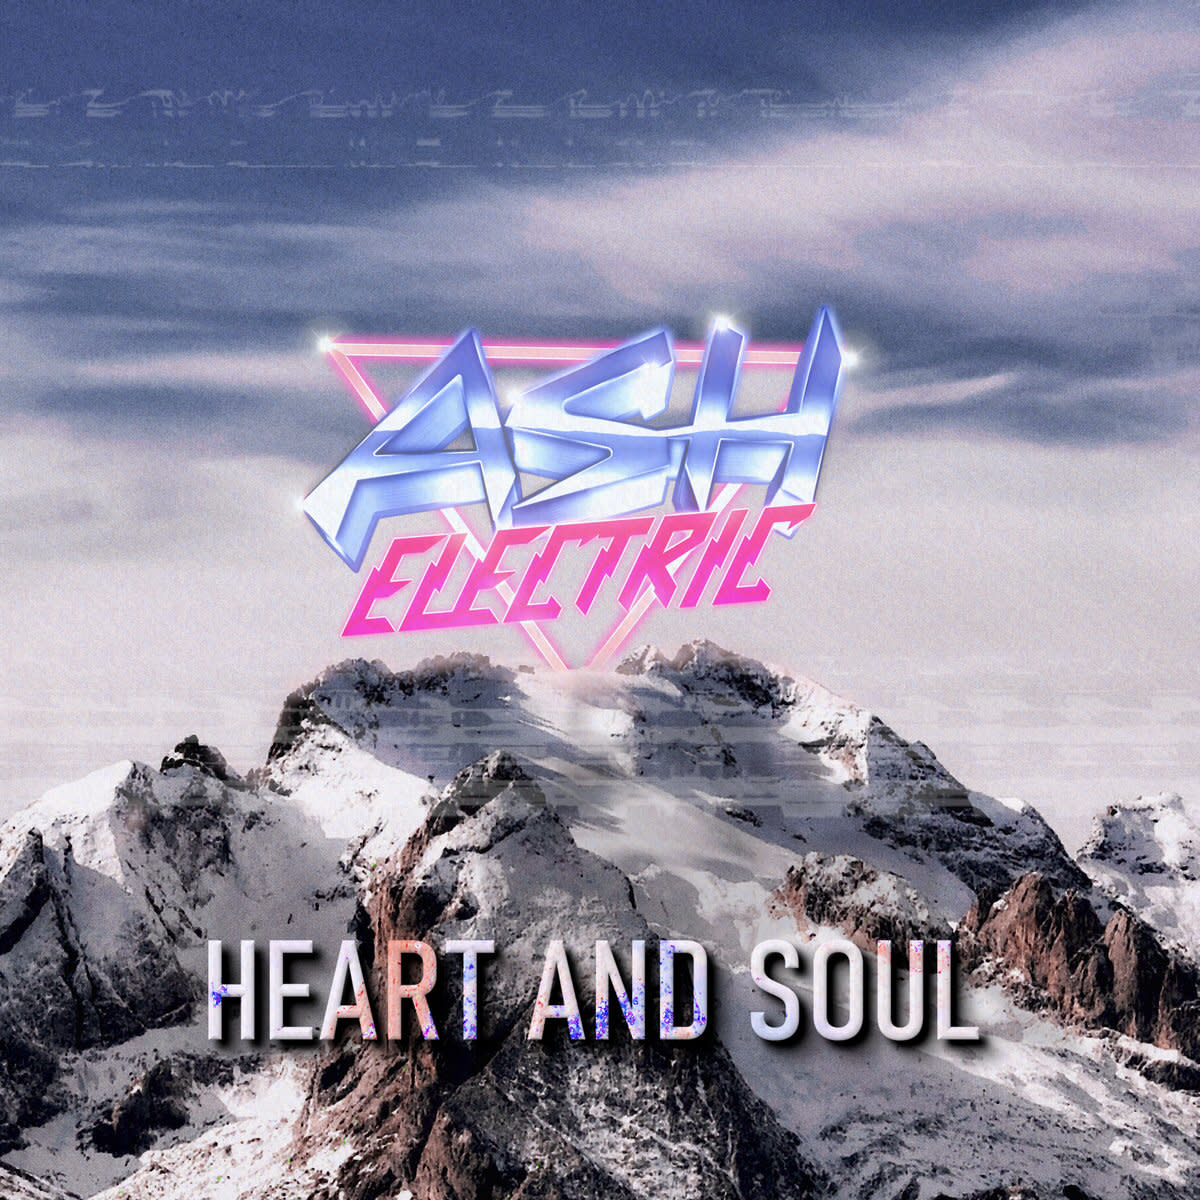 synth-single-review-heart-and-soul-by-ash-electric